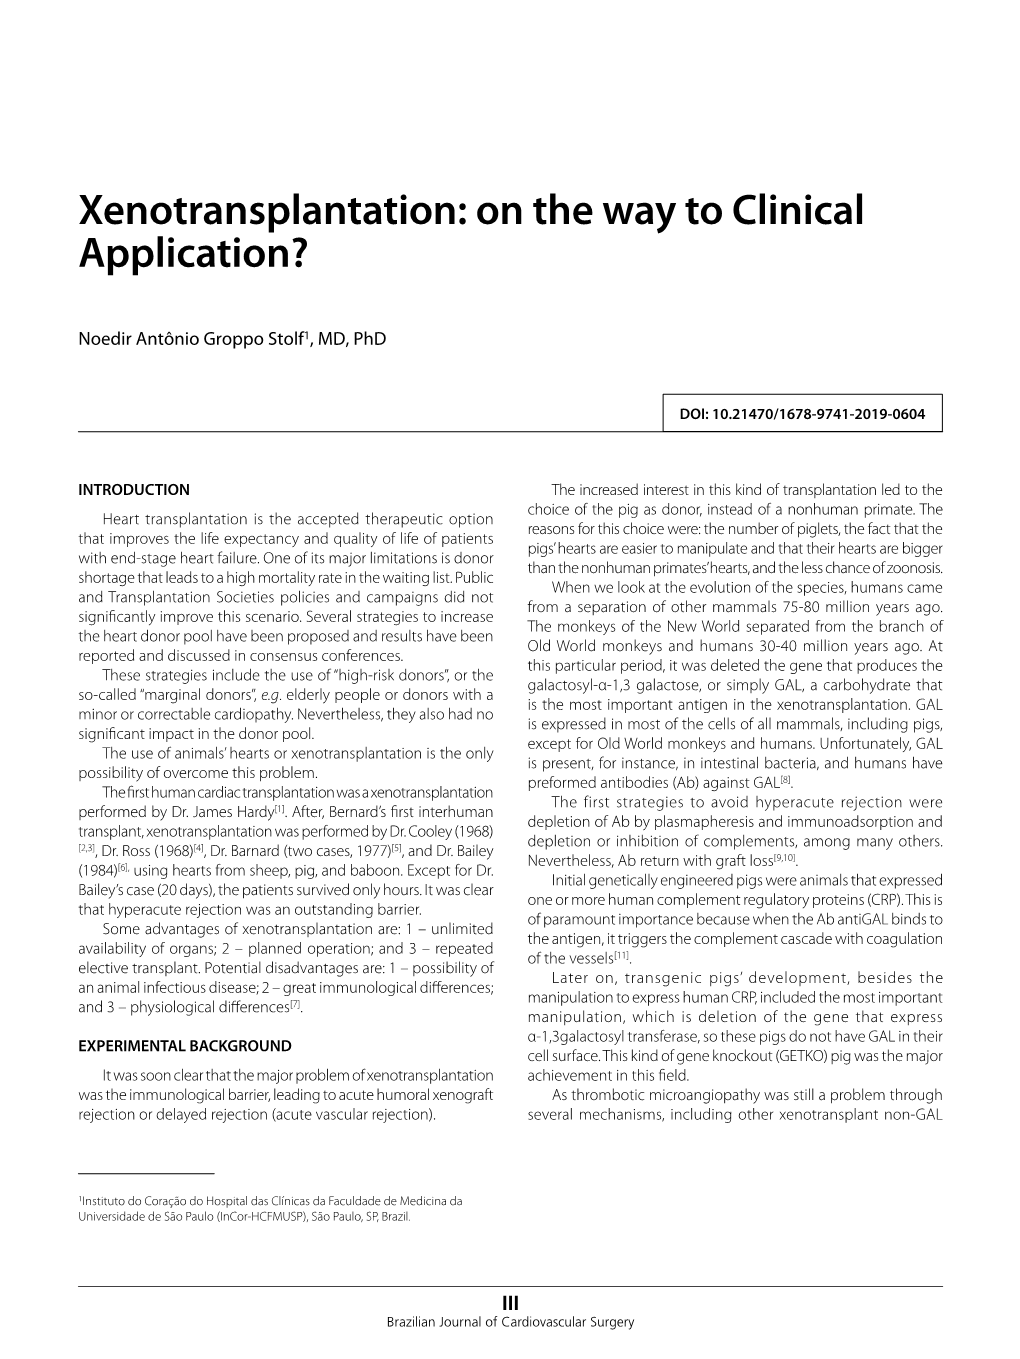 Xenotransplantation: on the Way to Clinical Application?